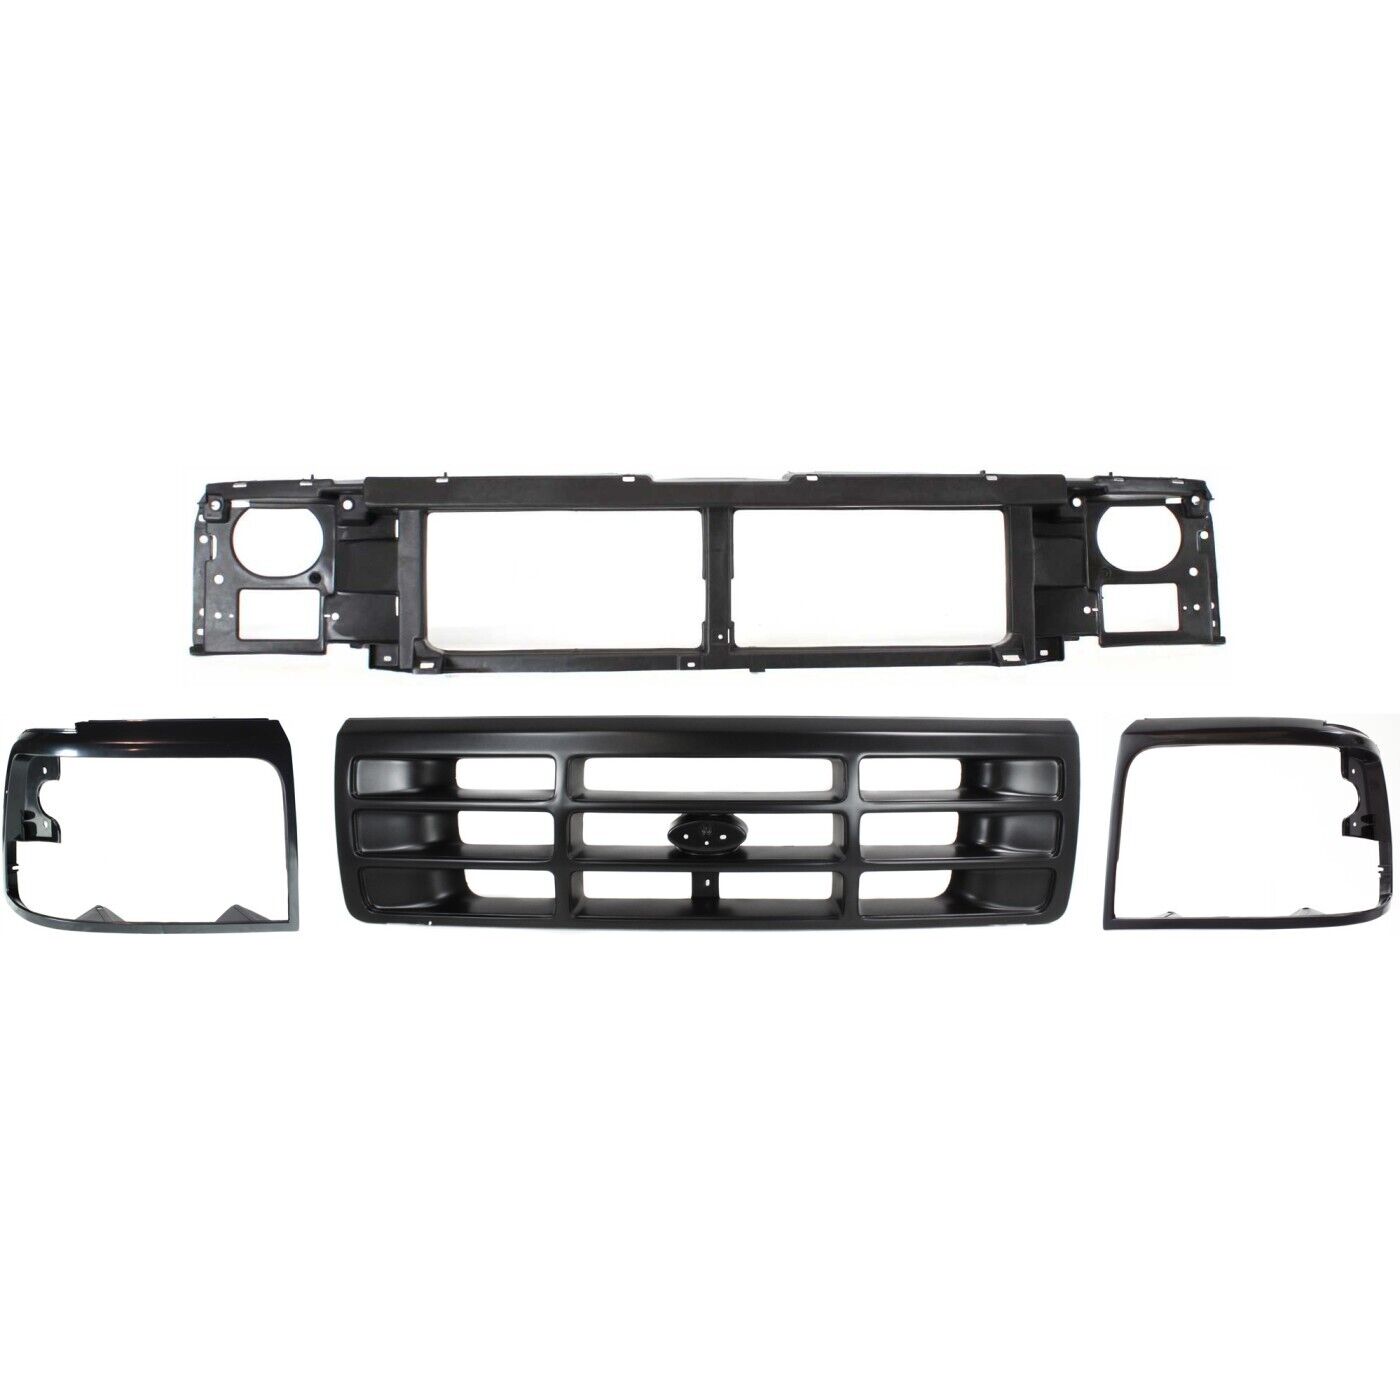 Header Panel Kit For 1992-1997 Ford F-150 Fits F250 Fits 1992-1996 Bronco